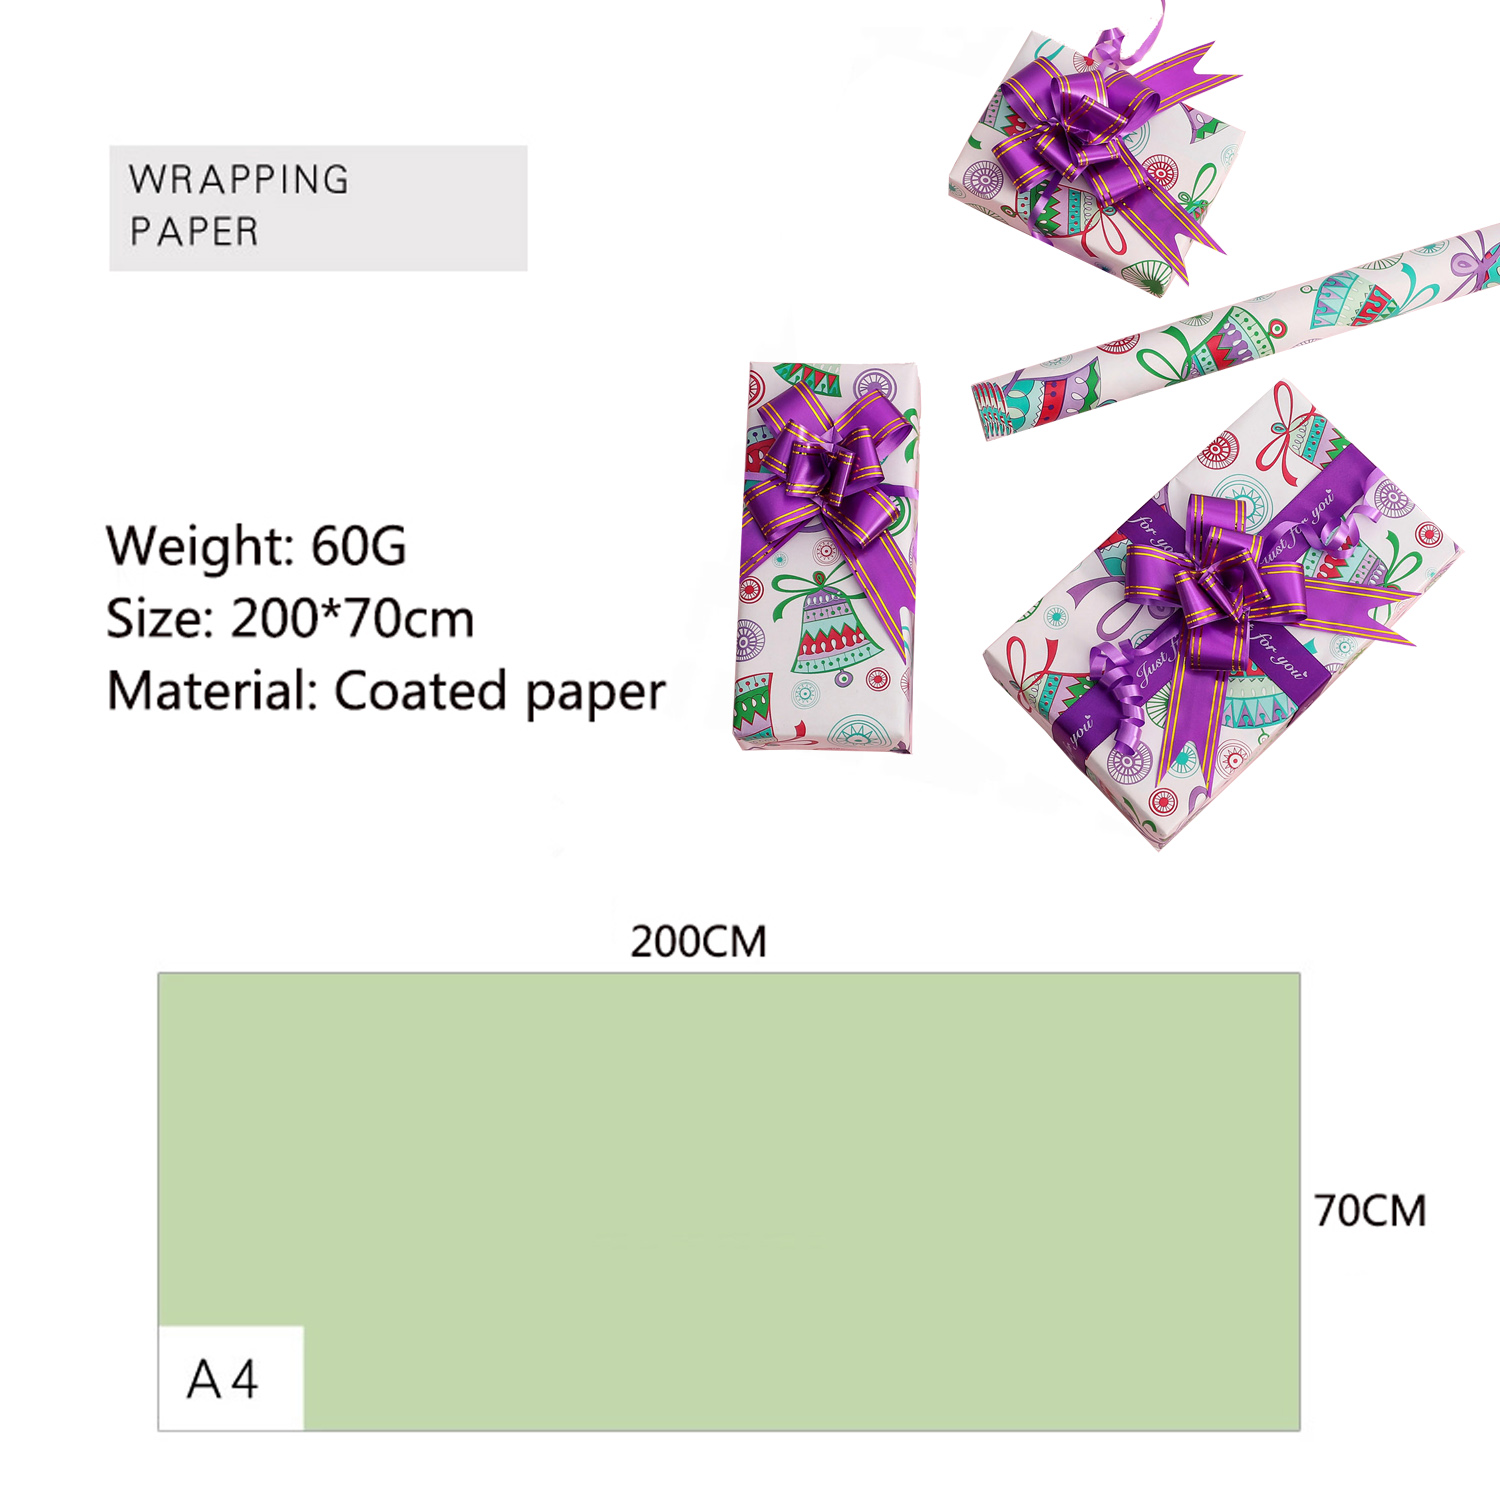 High-quality custom printed wrapping paper rolls wholesale vendor for packing gifts-1